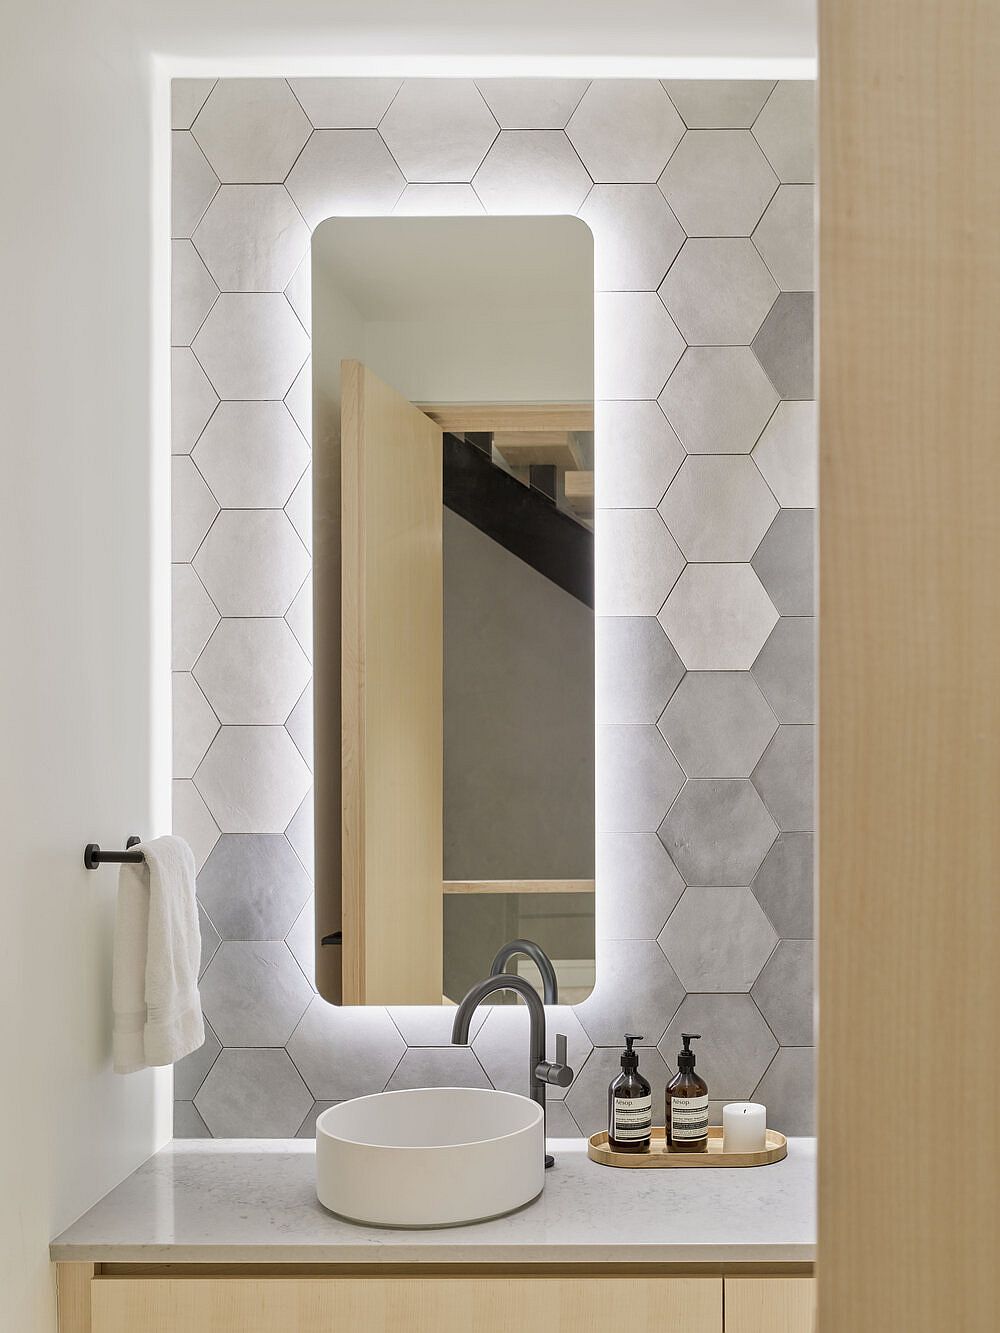 Gray hexagonal wall tiles bring a dash of visual and geometric contrast to the modern wood and white bathroom